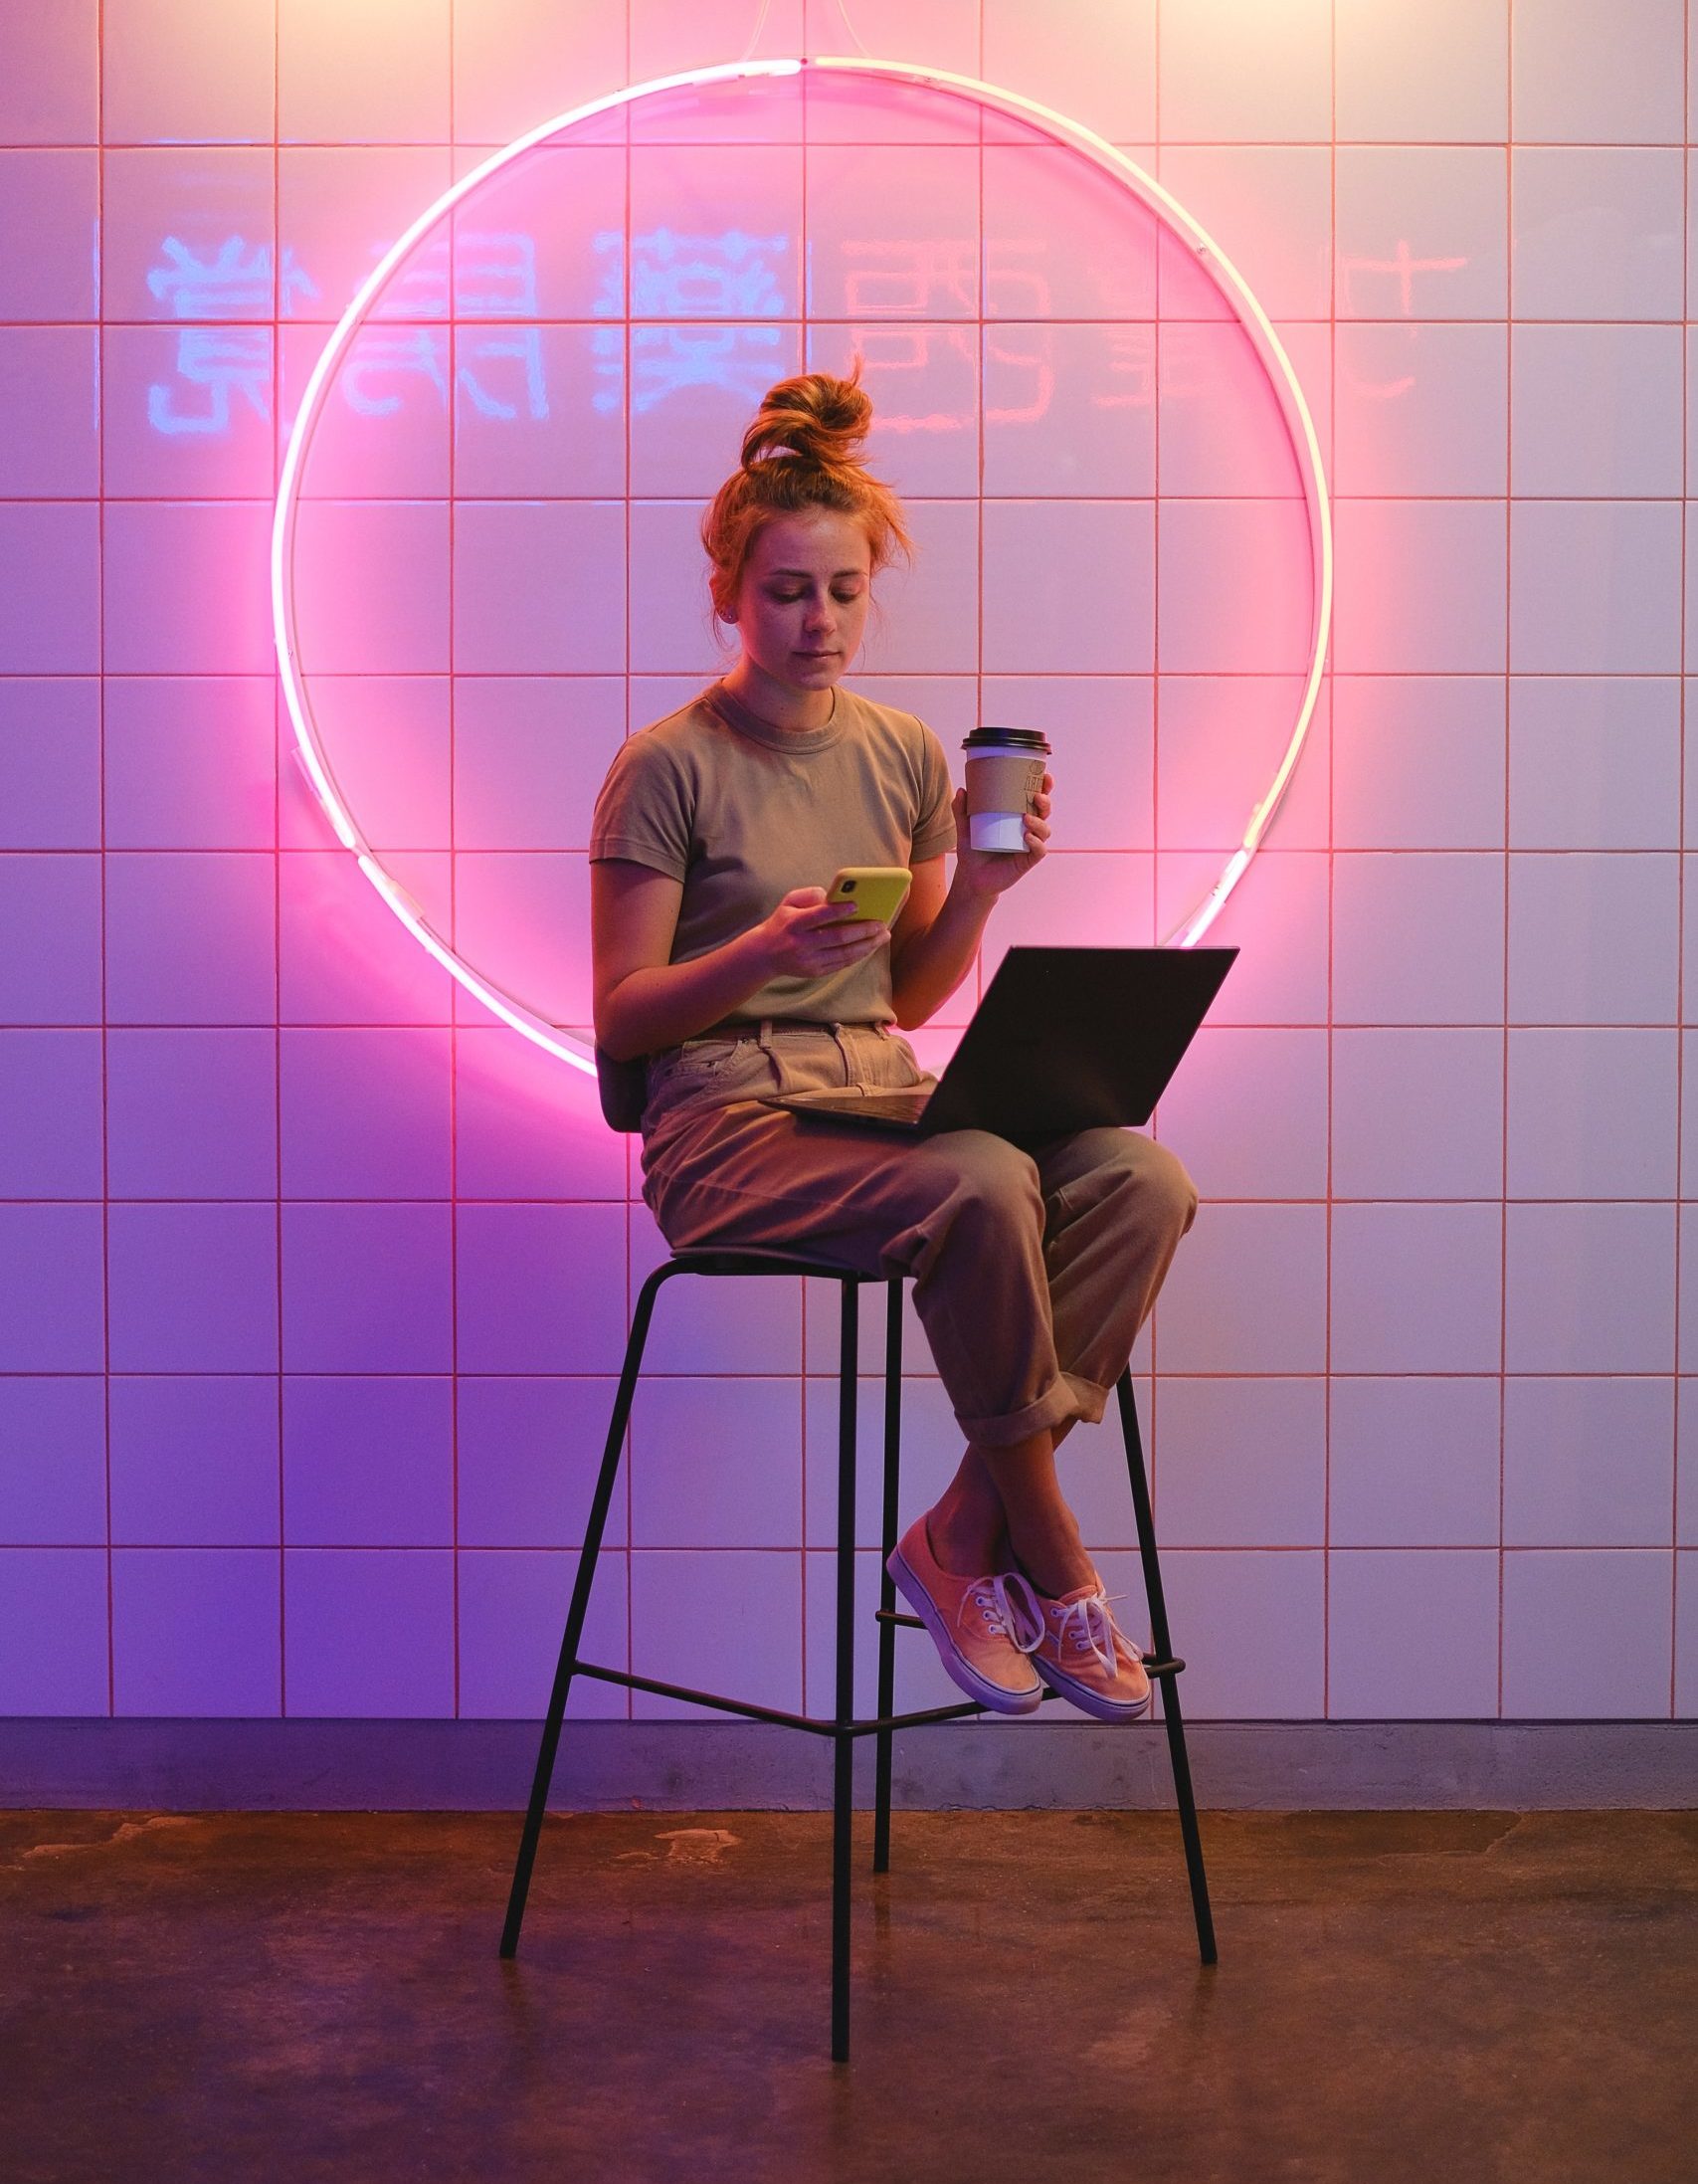 A photo of a woman sitting on a stool in front of a white tiled wall. A large neon circle is hanging on the wall and neon chinese characters are reflected in the glaze of the tiles. The woman is holding a coffee cup in one hand, a smartphone in the other, and has a laptop on her lap.